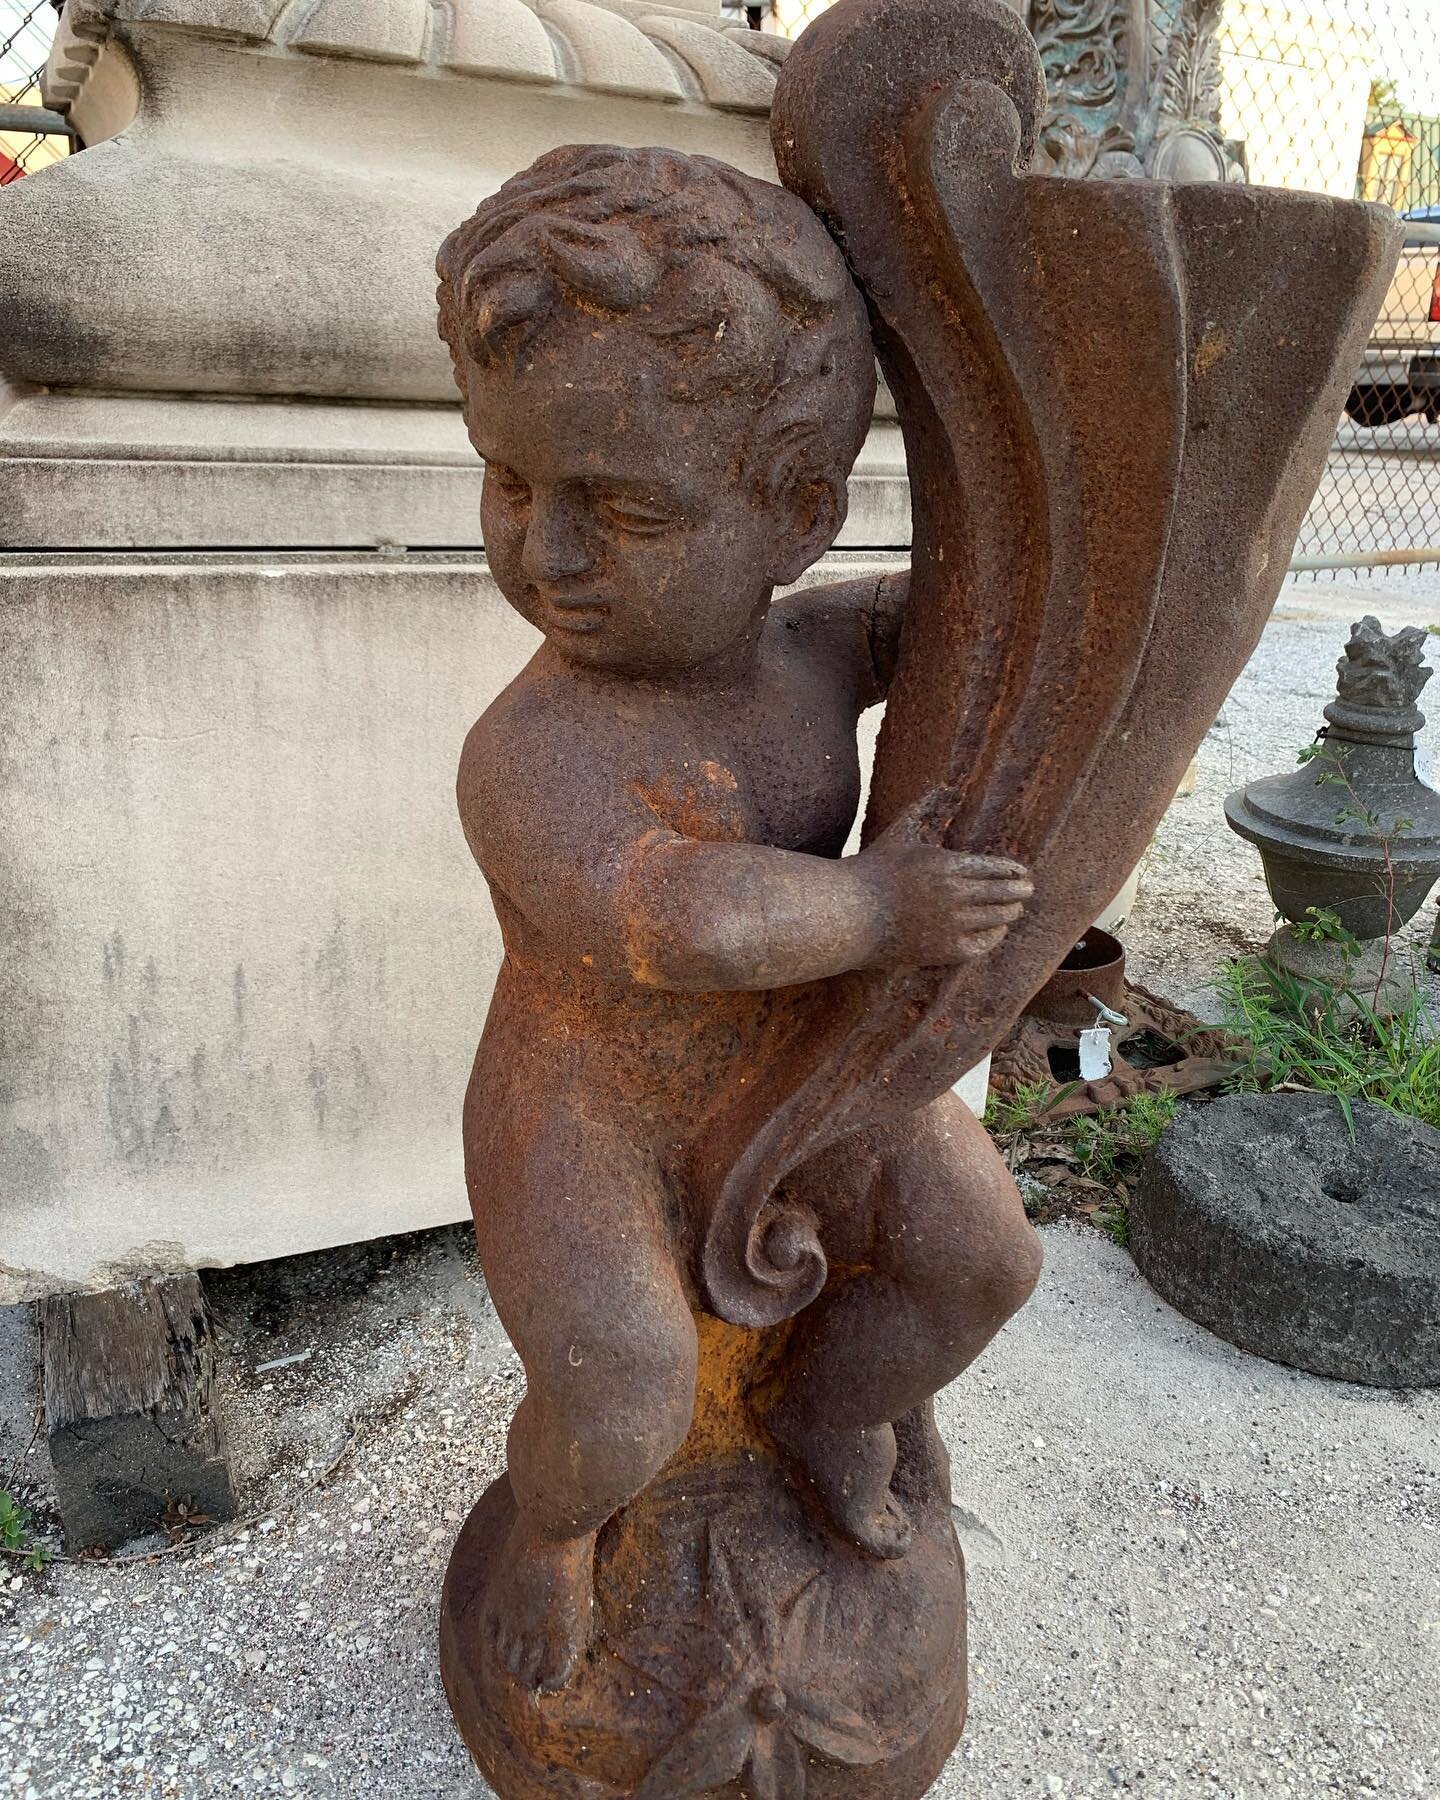 This sweet little guy would be so cute nestled in a garden with some delicate little fern #gardendesign #antiques #gardeninglife #frenchgarden #salvage #design